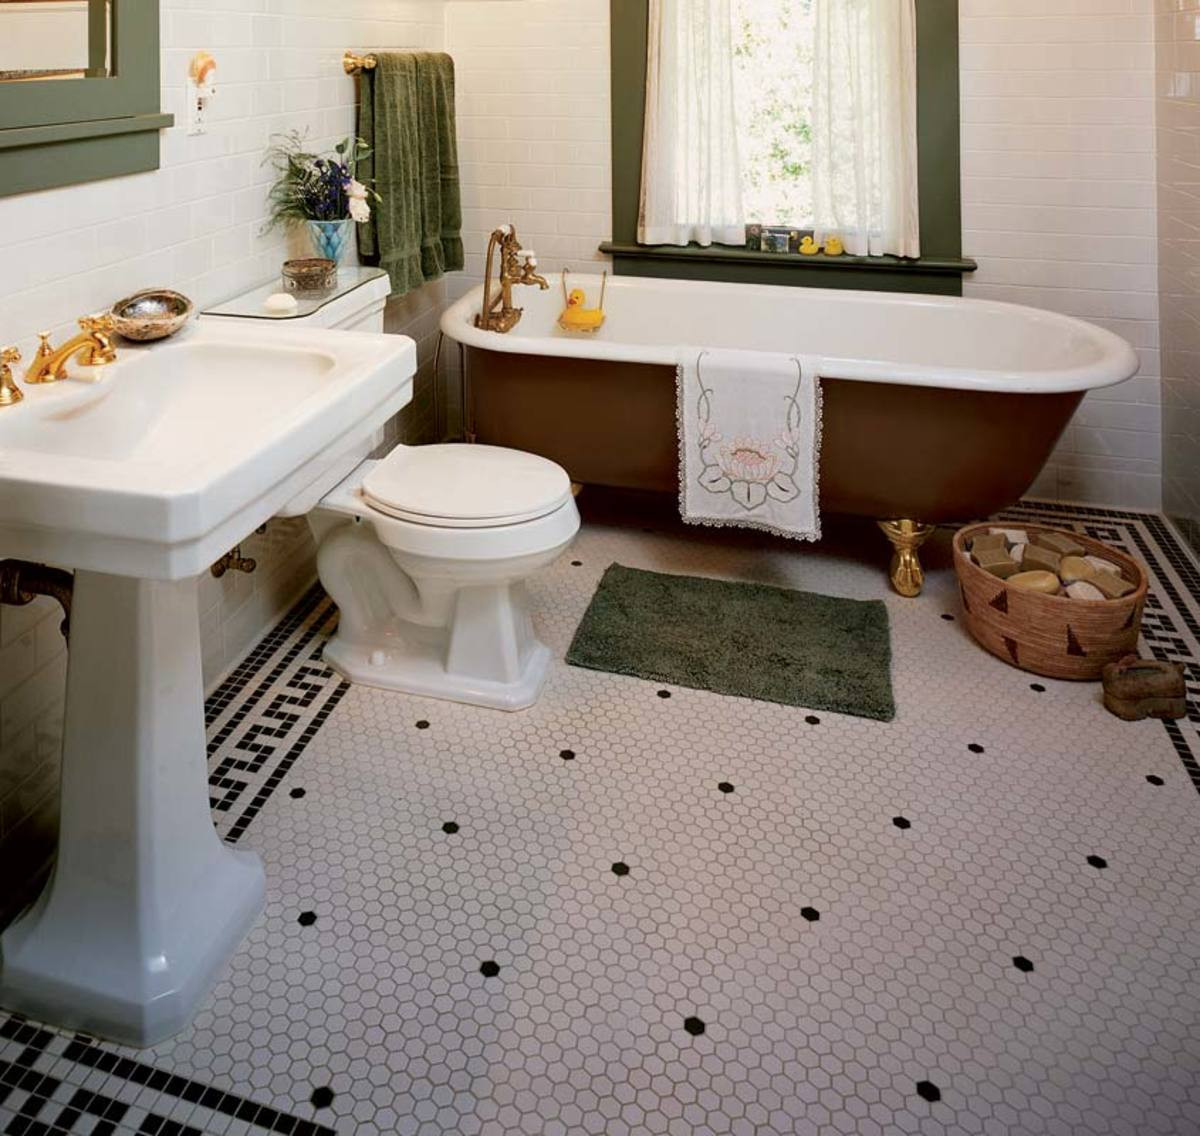 Hexagon Tiles Bathroom
 The Floor is a Key to Style Arts & Crafts Homes and the